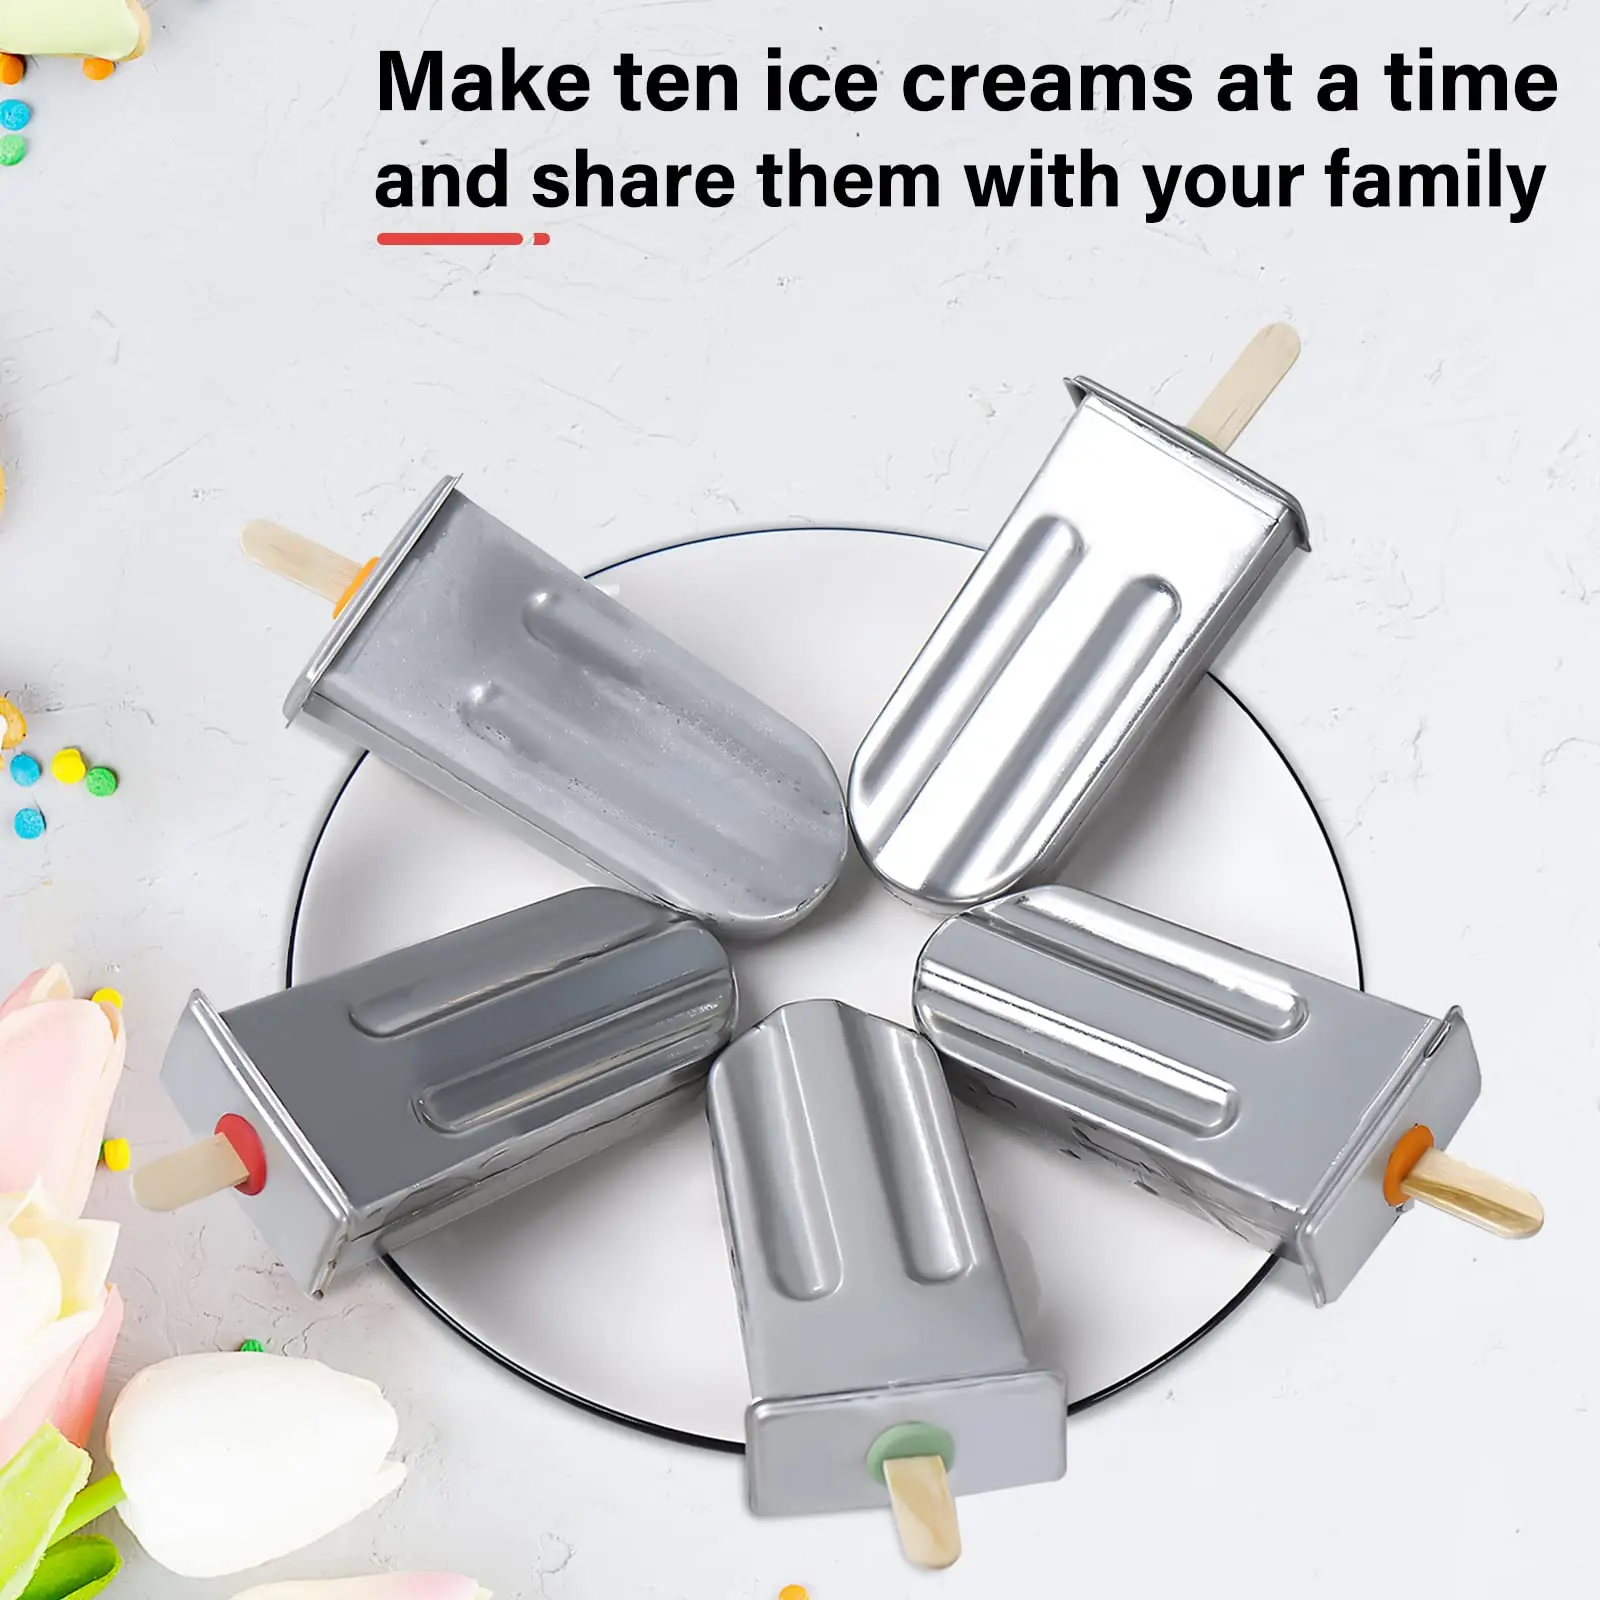 Metal Popsicle Moulds Set of 10 Stainless Steel Ice Lolly Molds with Holder stainless steel popsicle mold